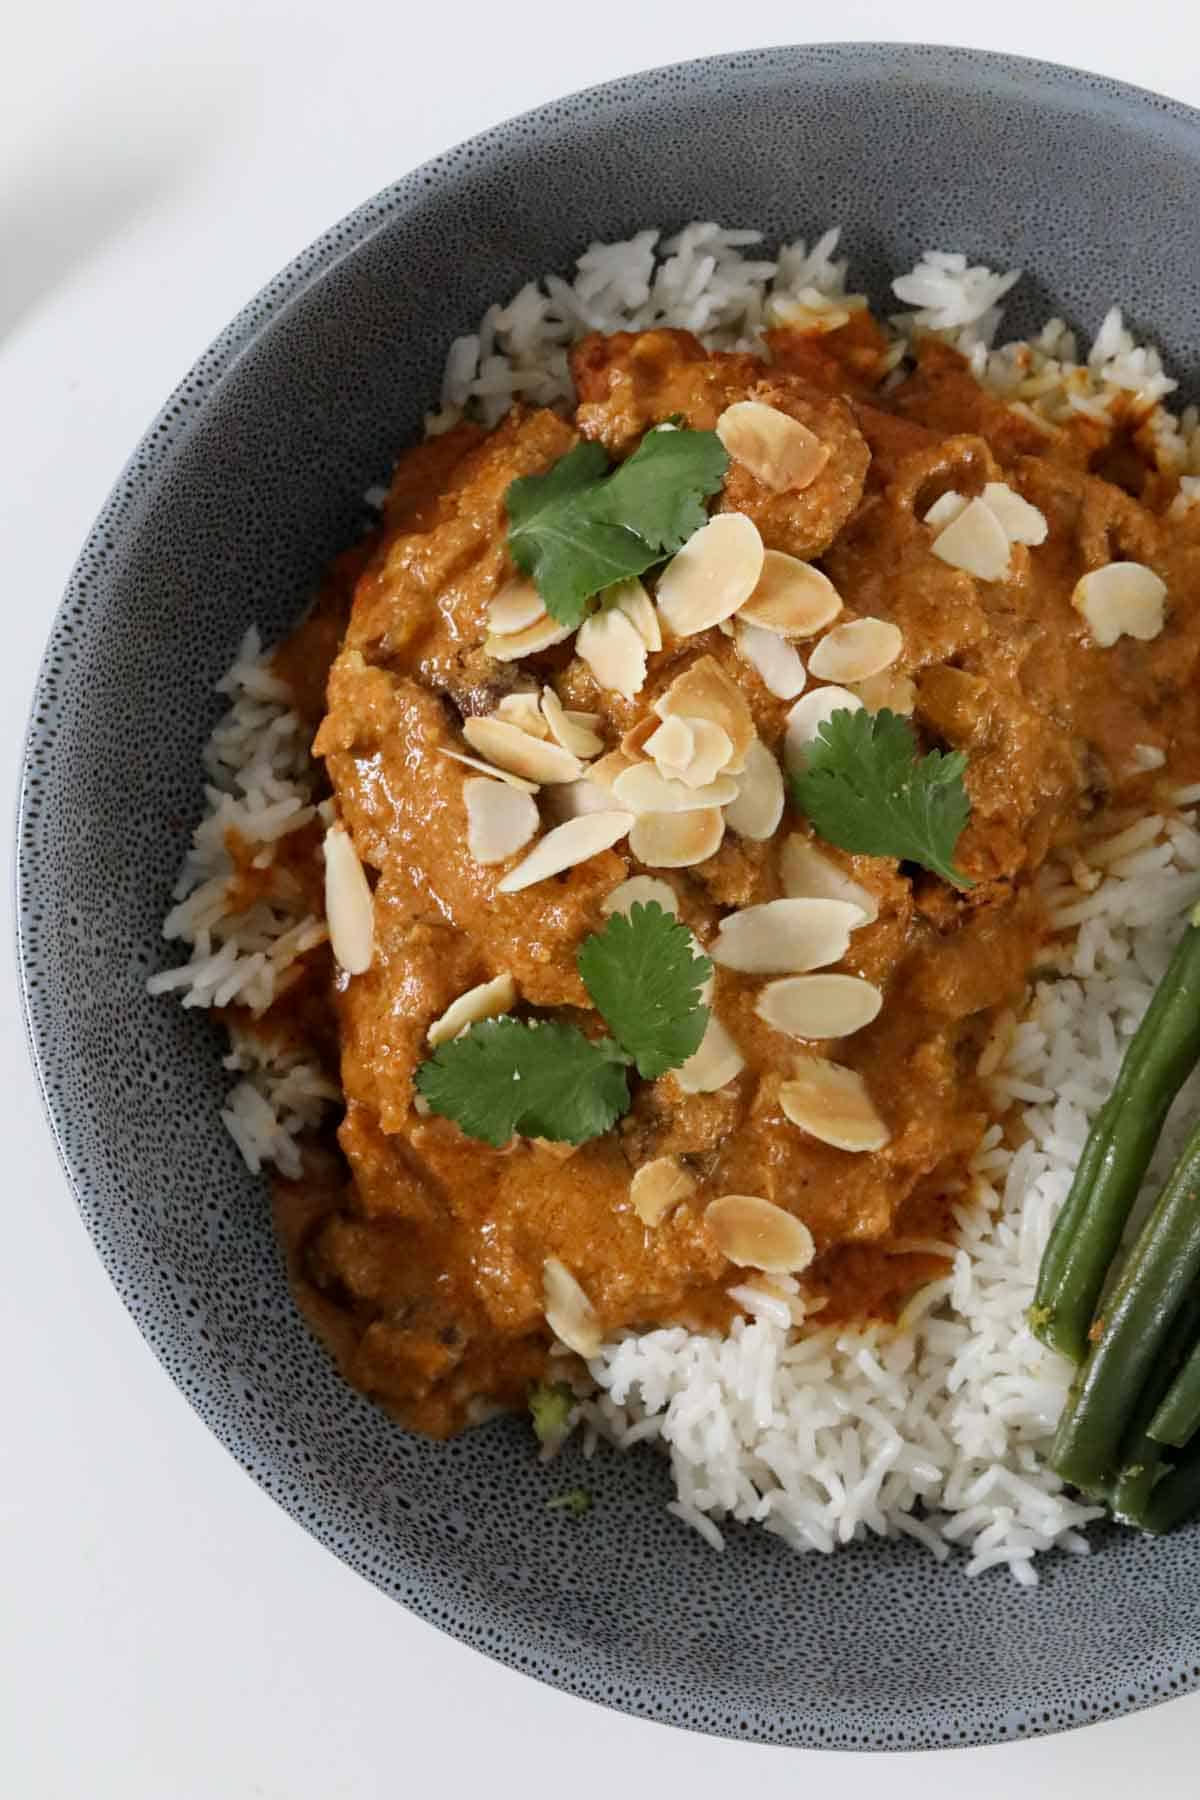 Slow cooker chicken korma served in a grey bowl with rice and green beans, topped with flaked almonds and fresh coriander.